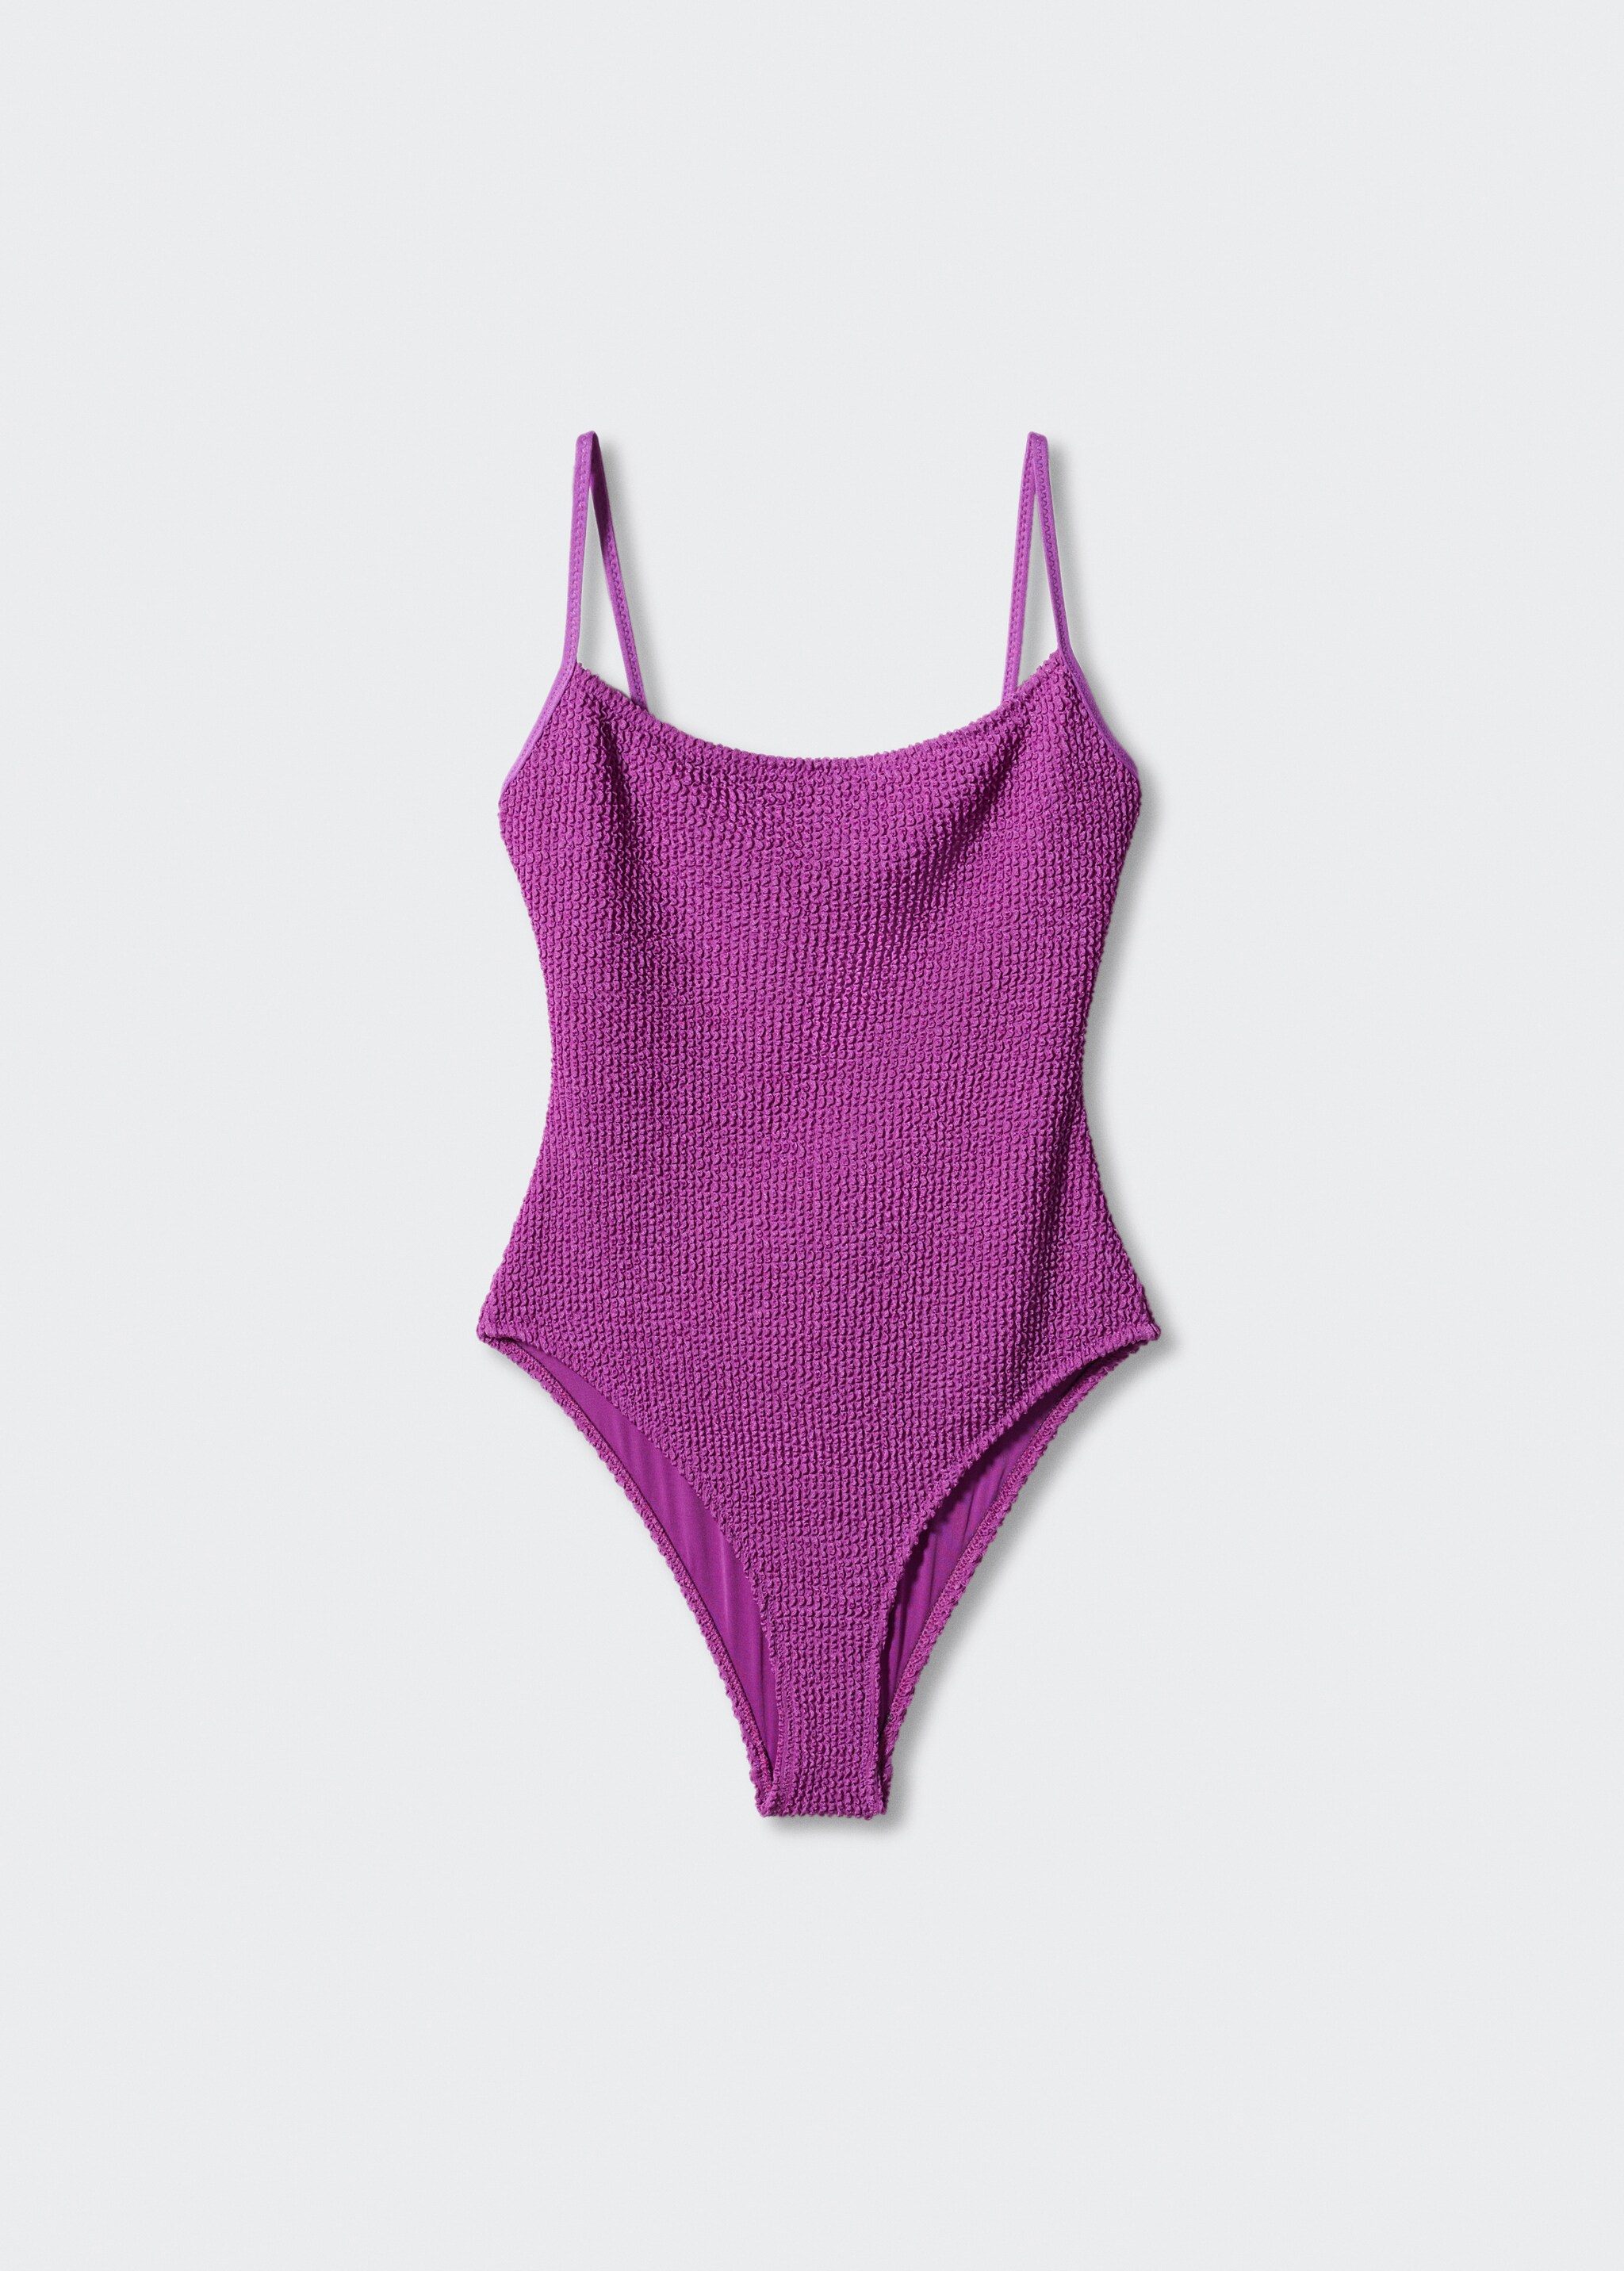 Textured swimsuit - Article without model